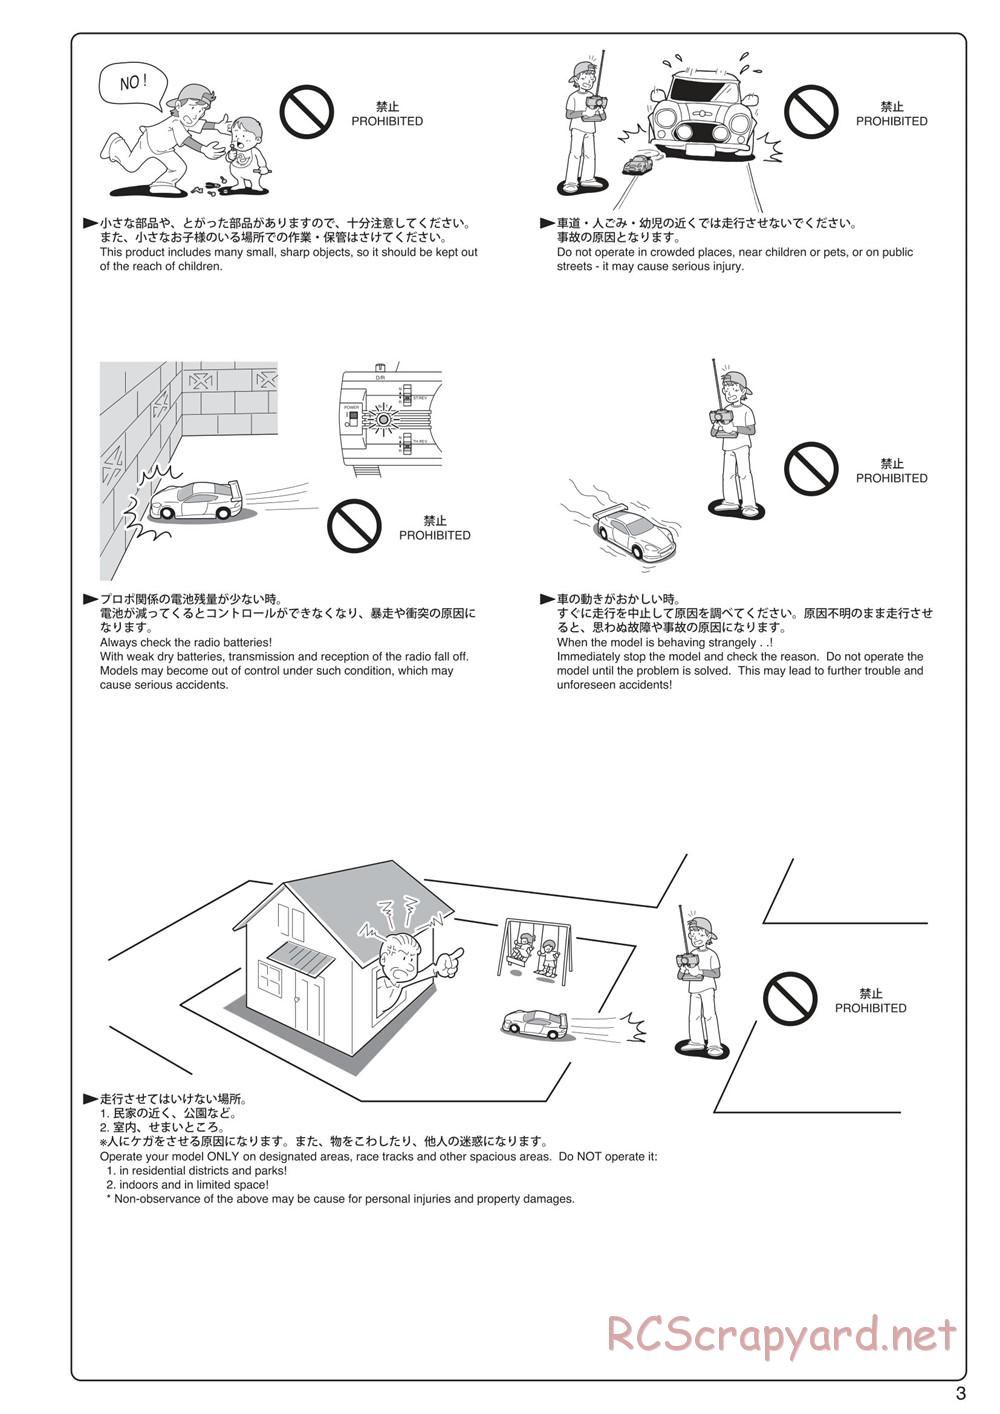 Kyosho - Ultima RB6 - Manual - Page 3